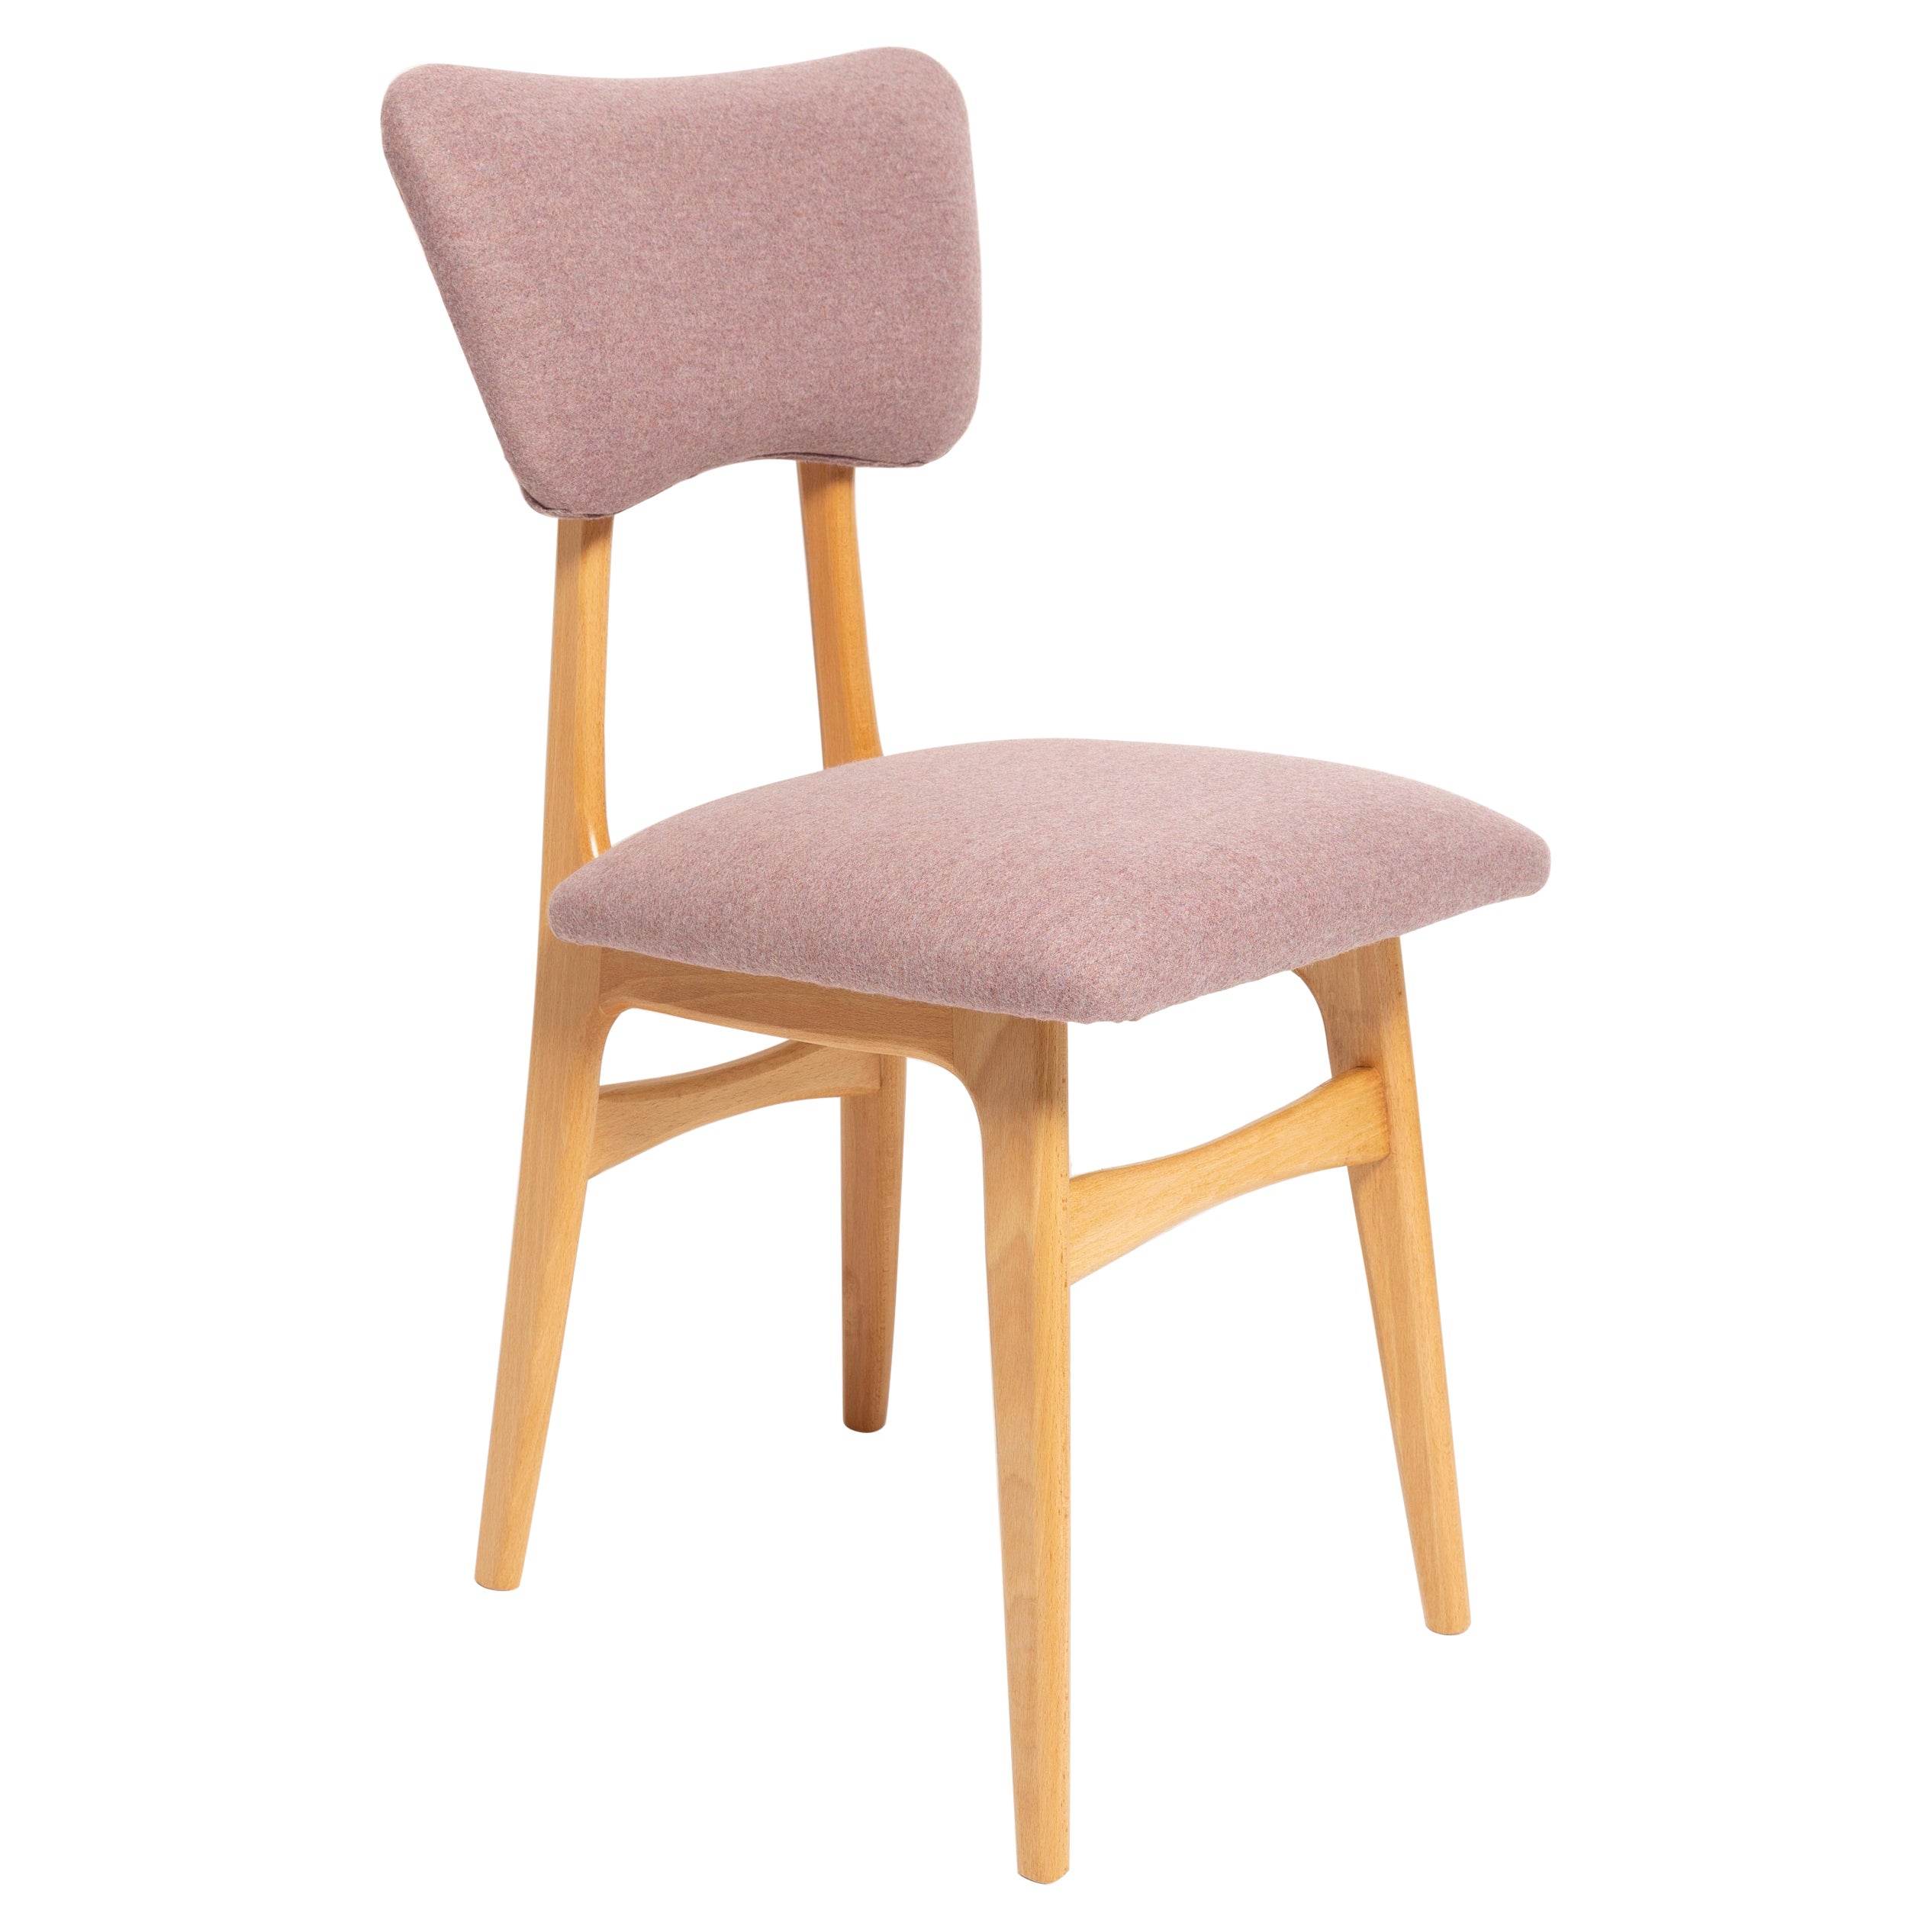 20th Century Butterfly Dining Chair, Pink Wool, Light Wood, Europe, 1960s For Sale